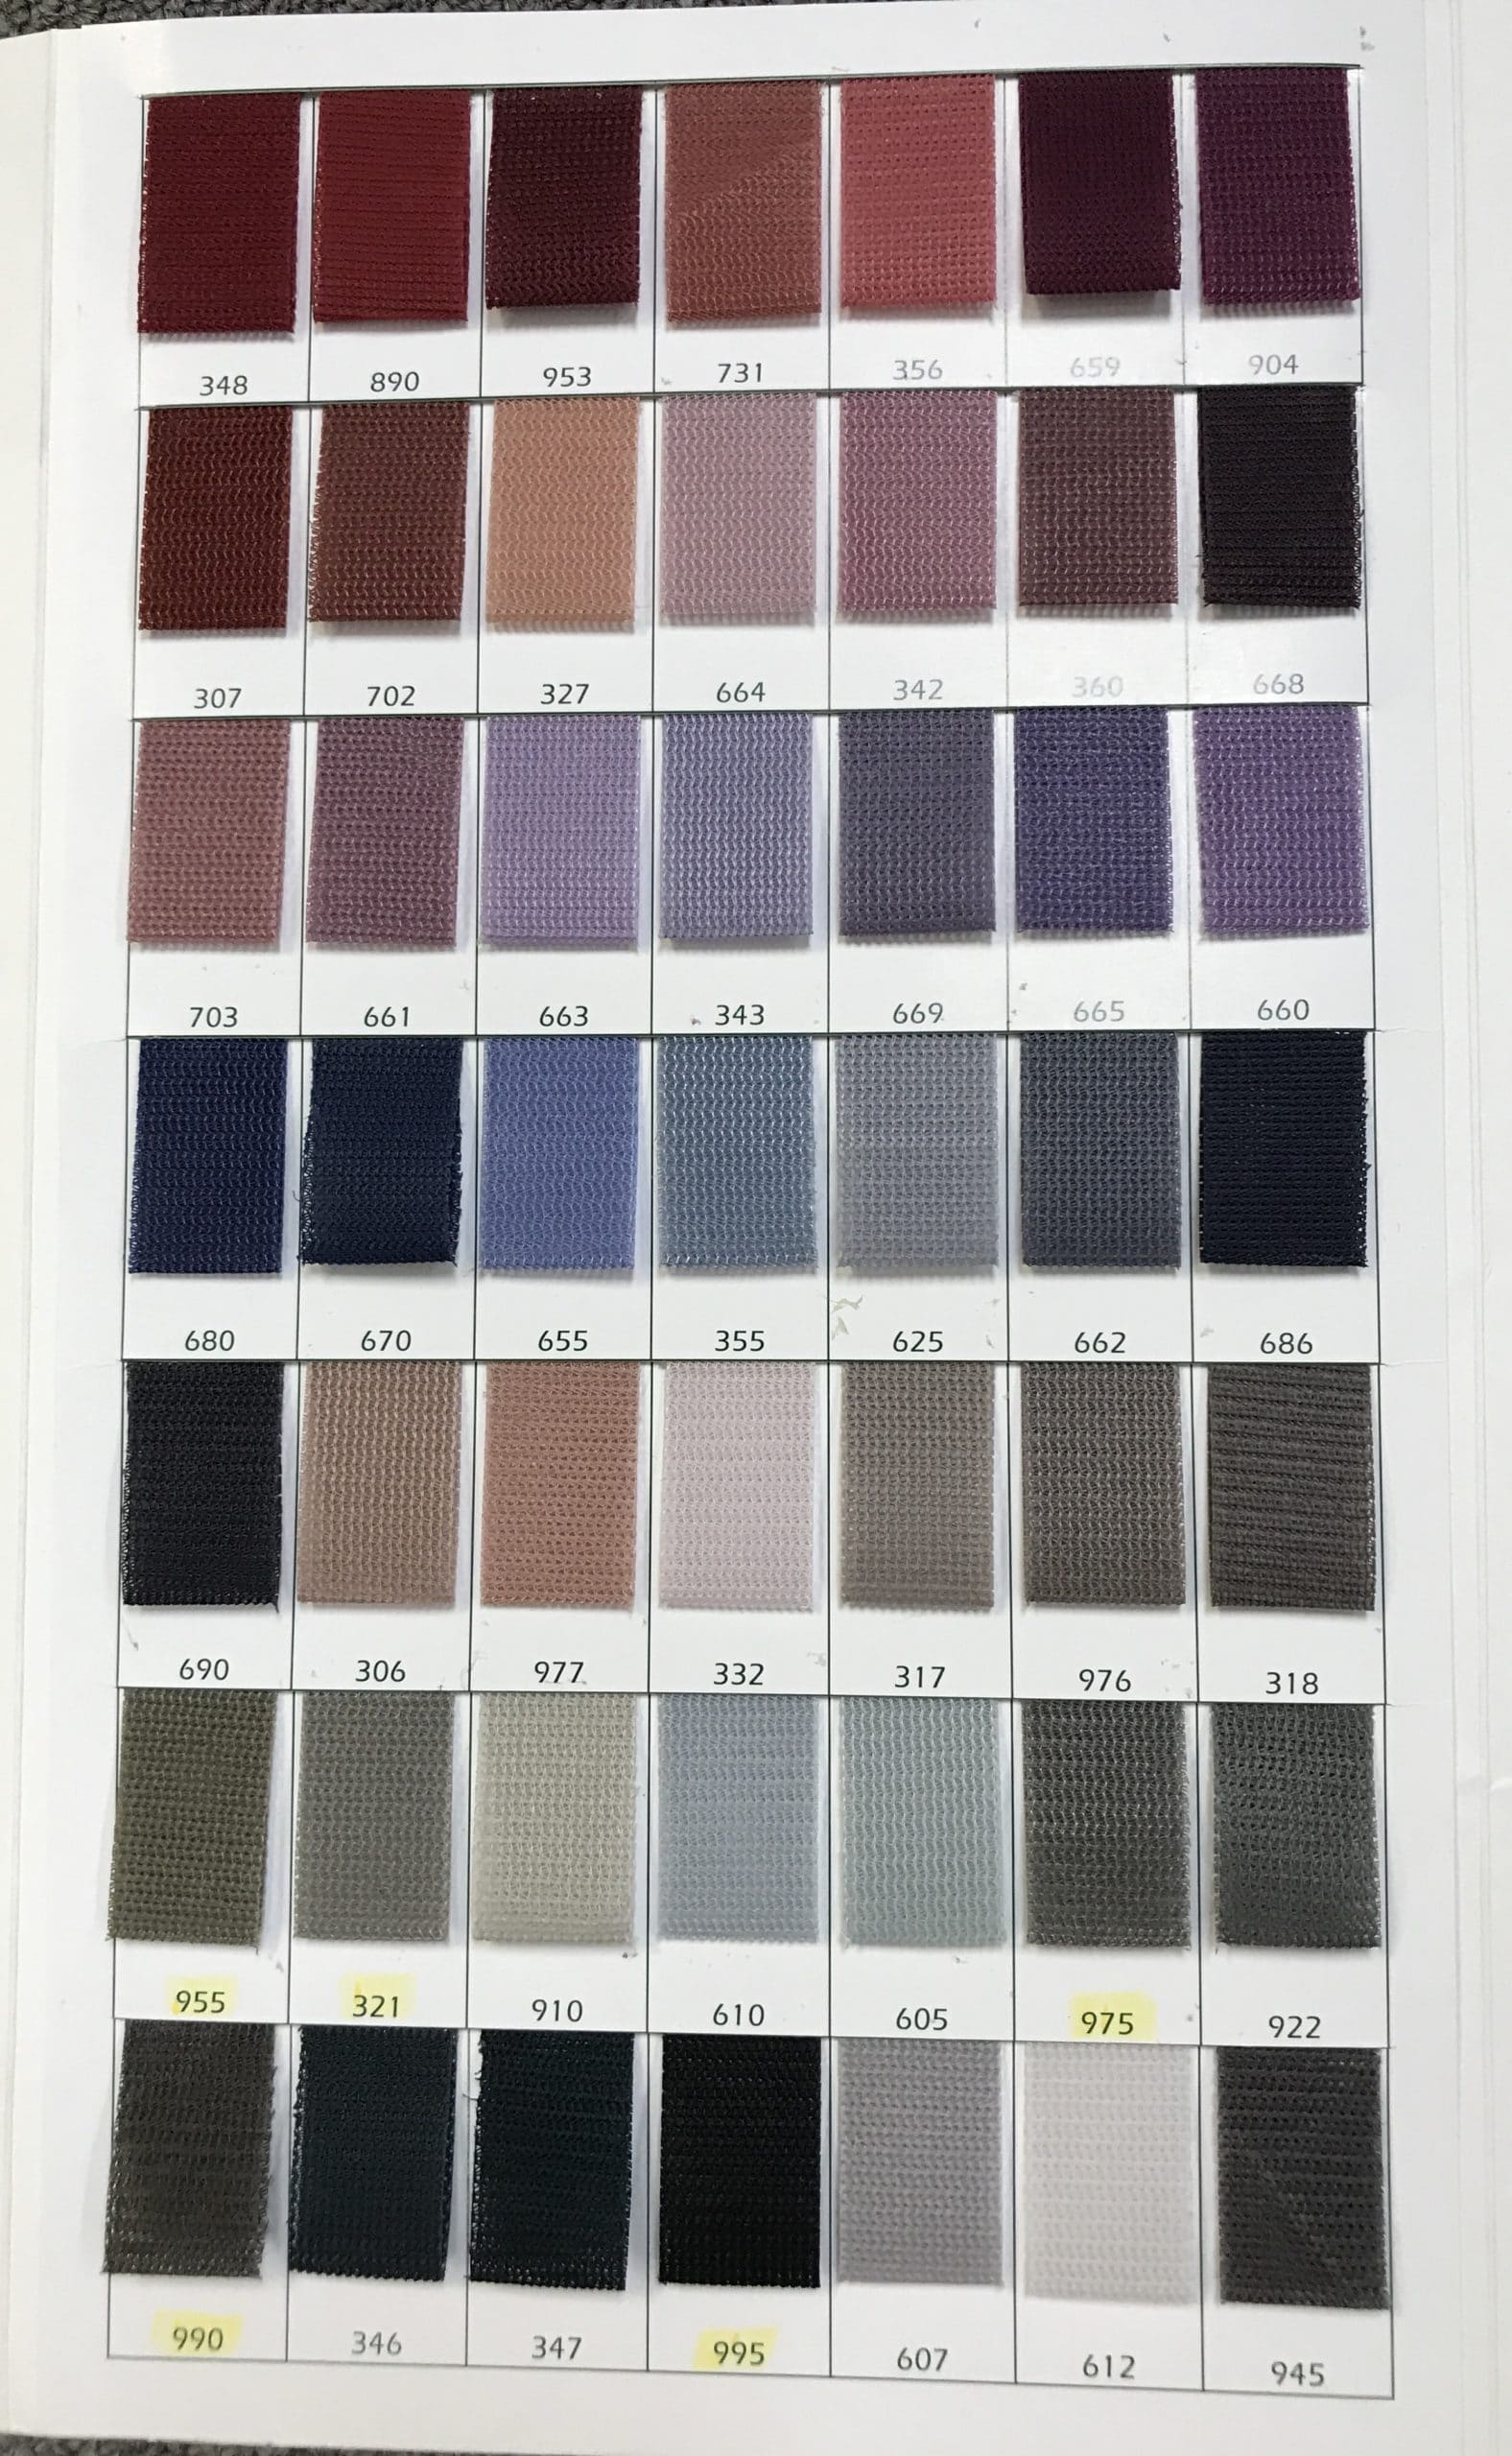 Instabind Regular Style & 3 syn/cotton Sample Chart - Bond Products Inc